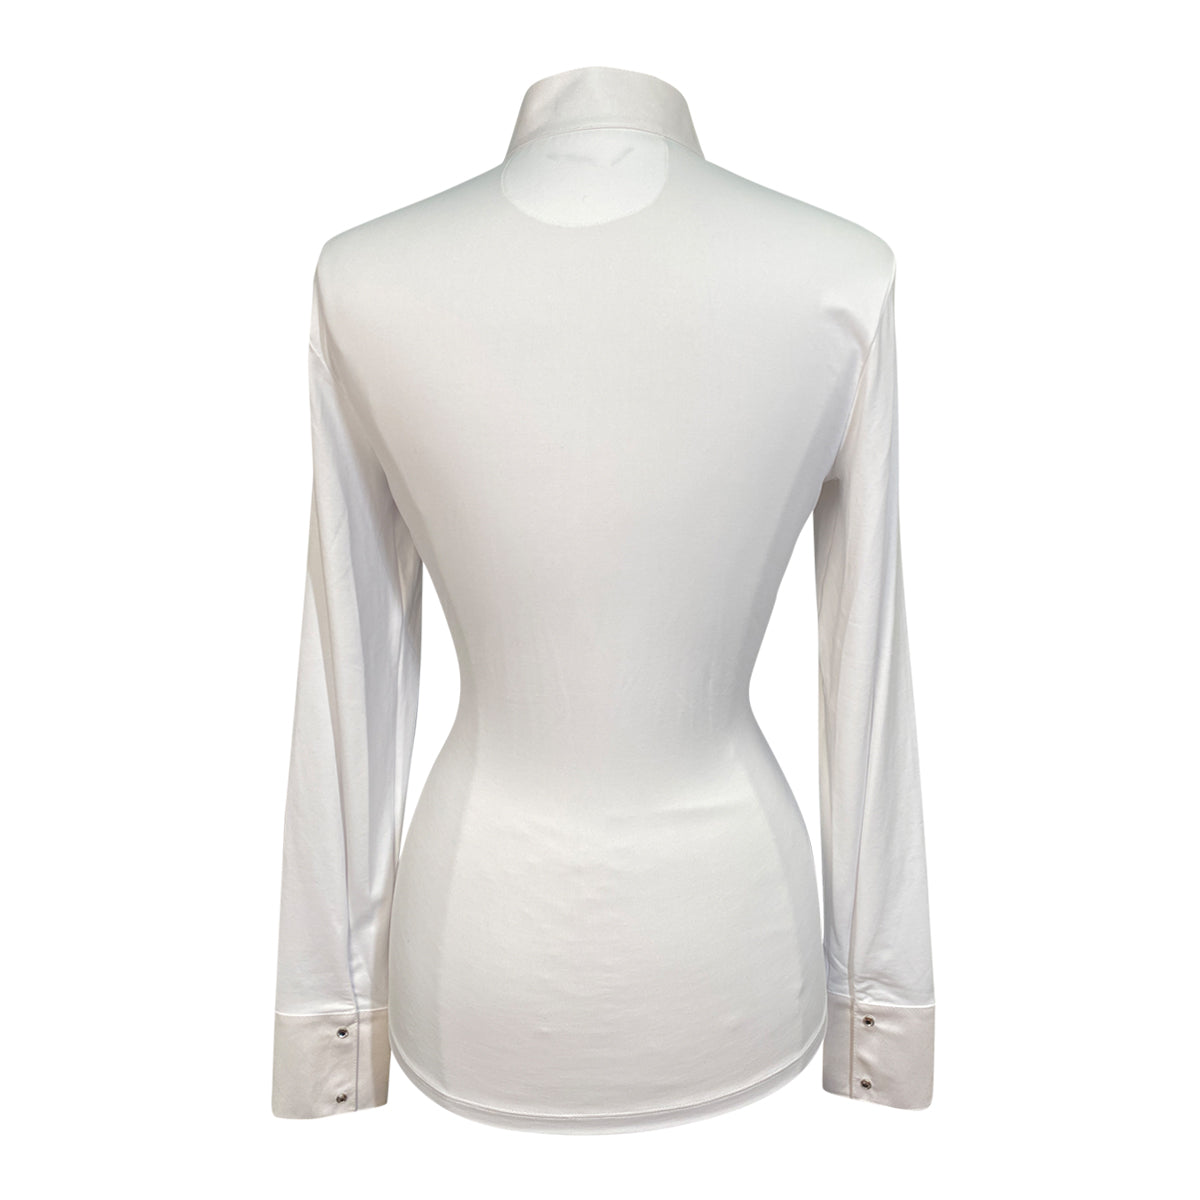 Equiline &#39;GummiG&#39; Long Sleeve Show Shirt in White/Gems